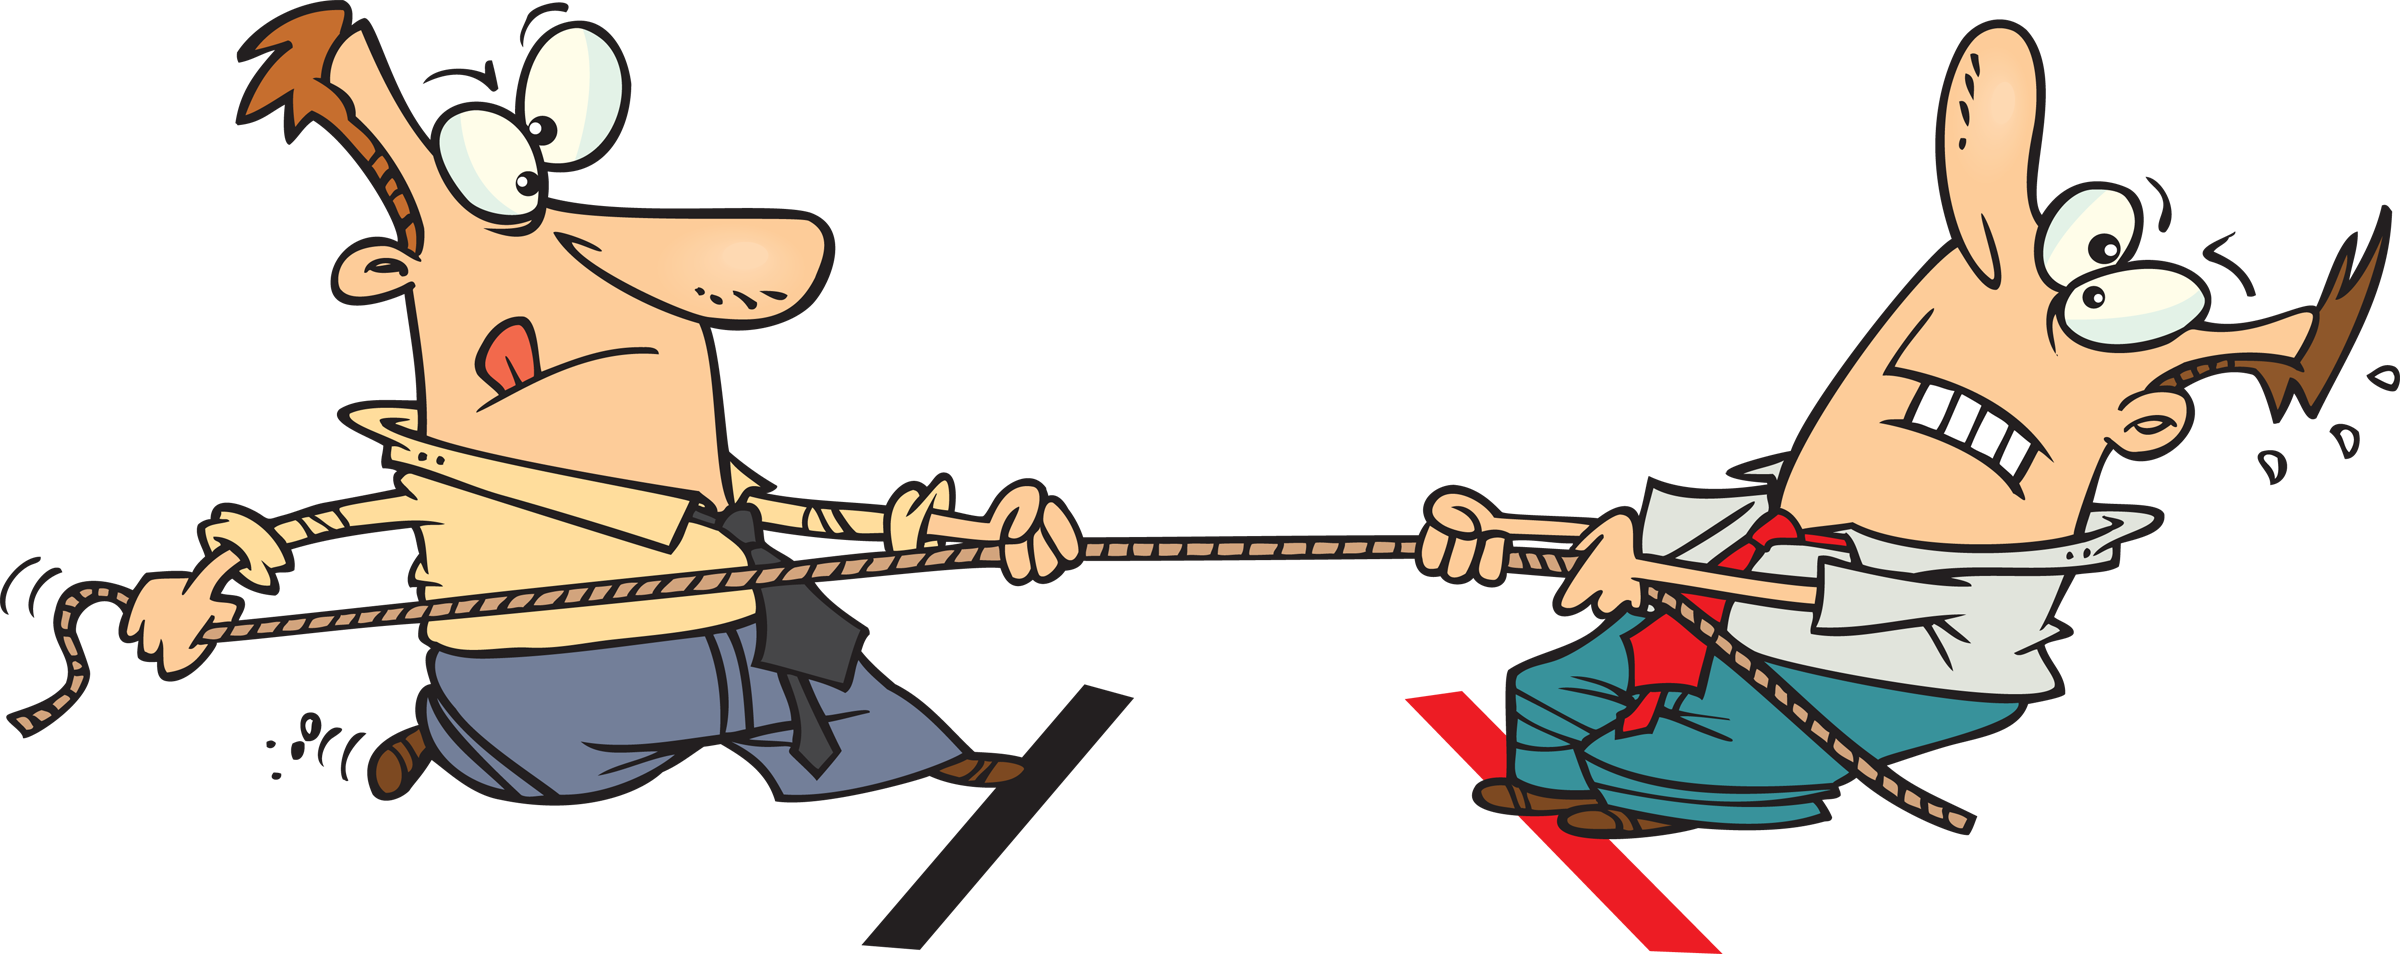 Animated tug of war clipart clipartfest 3